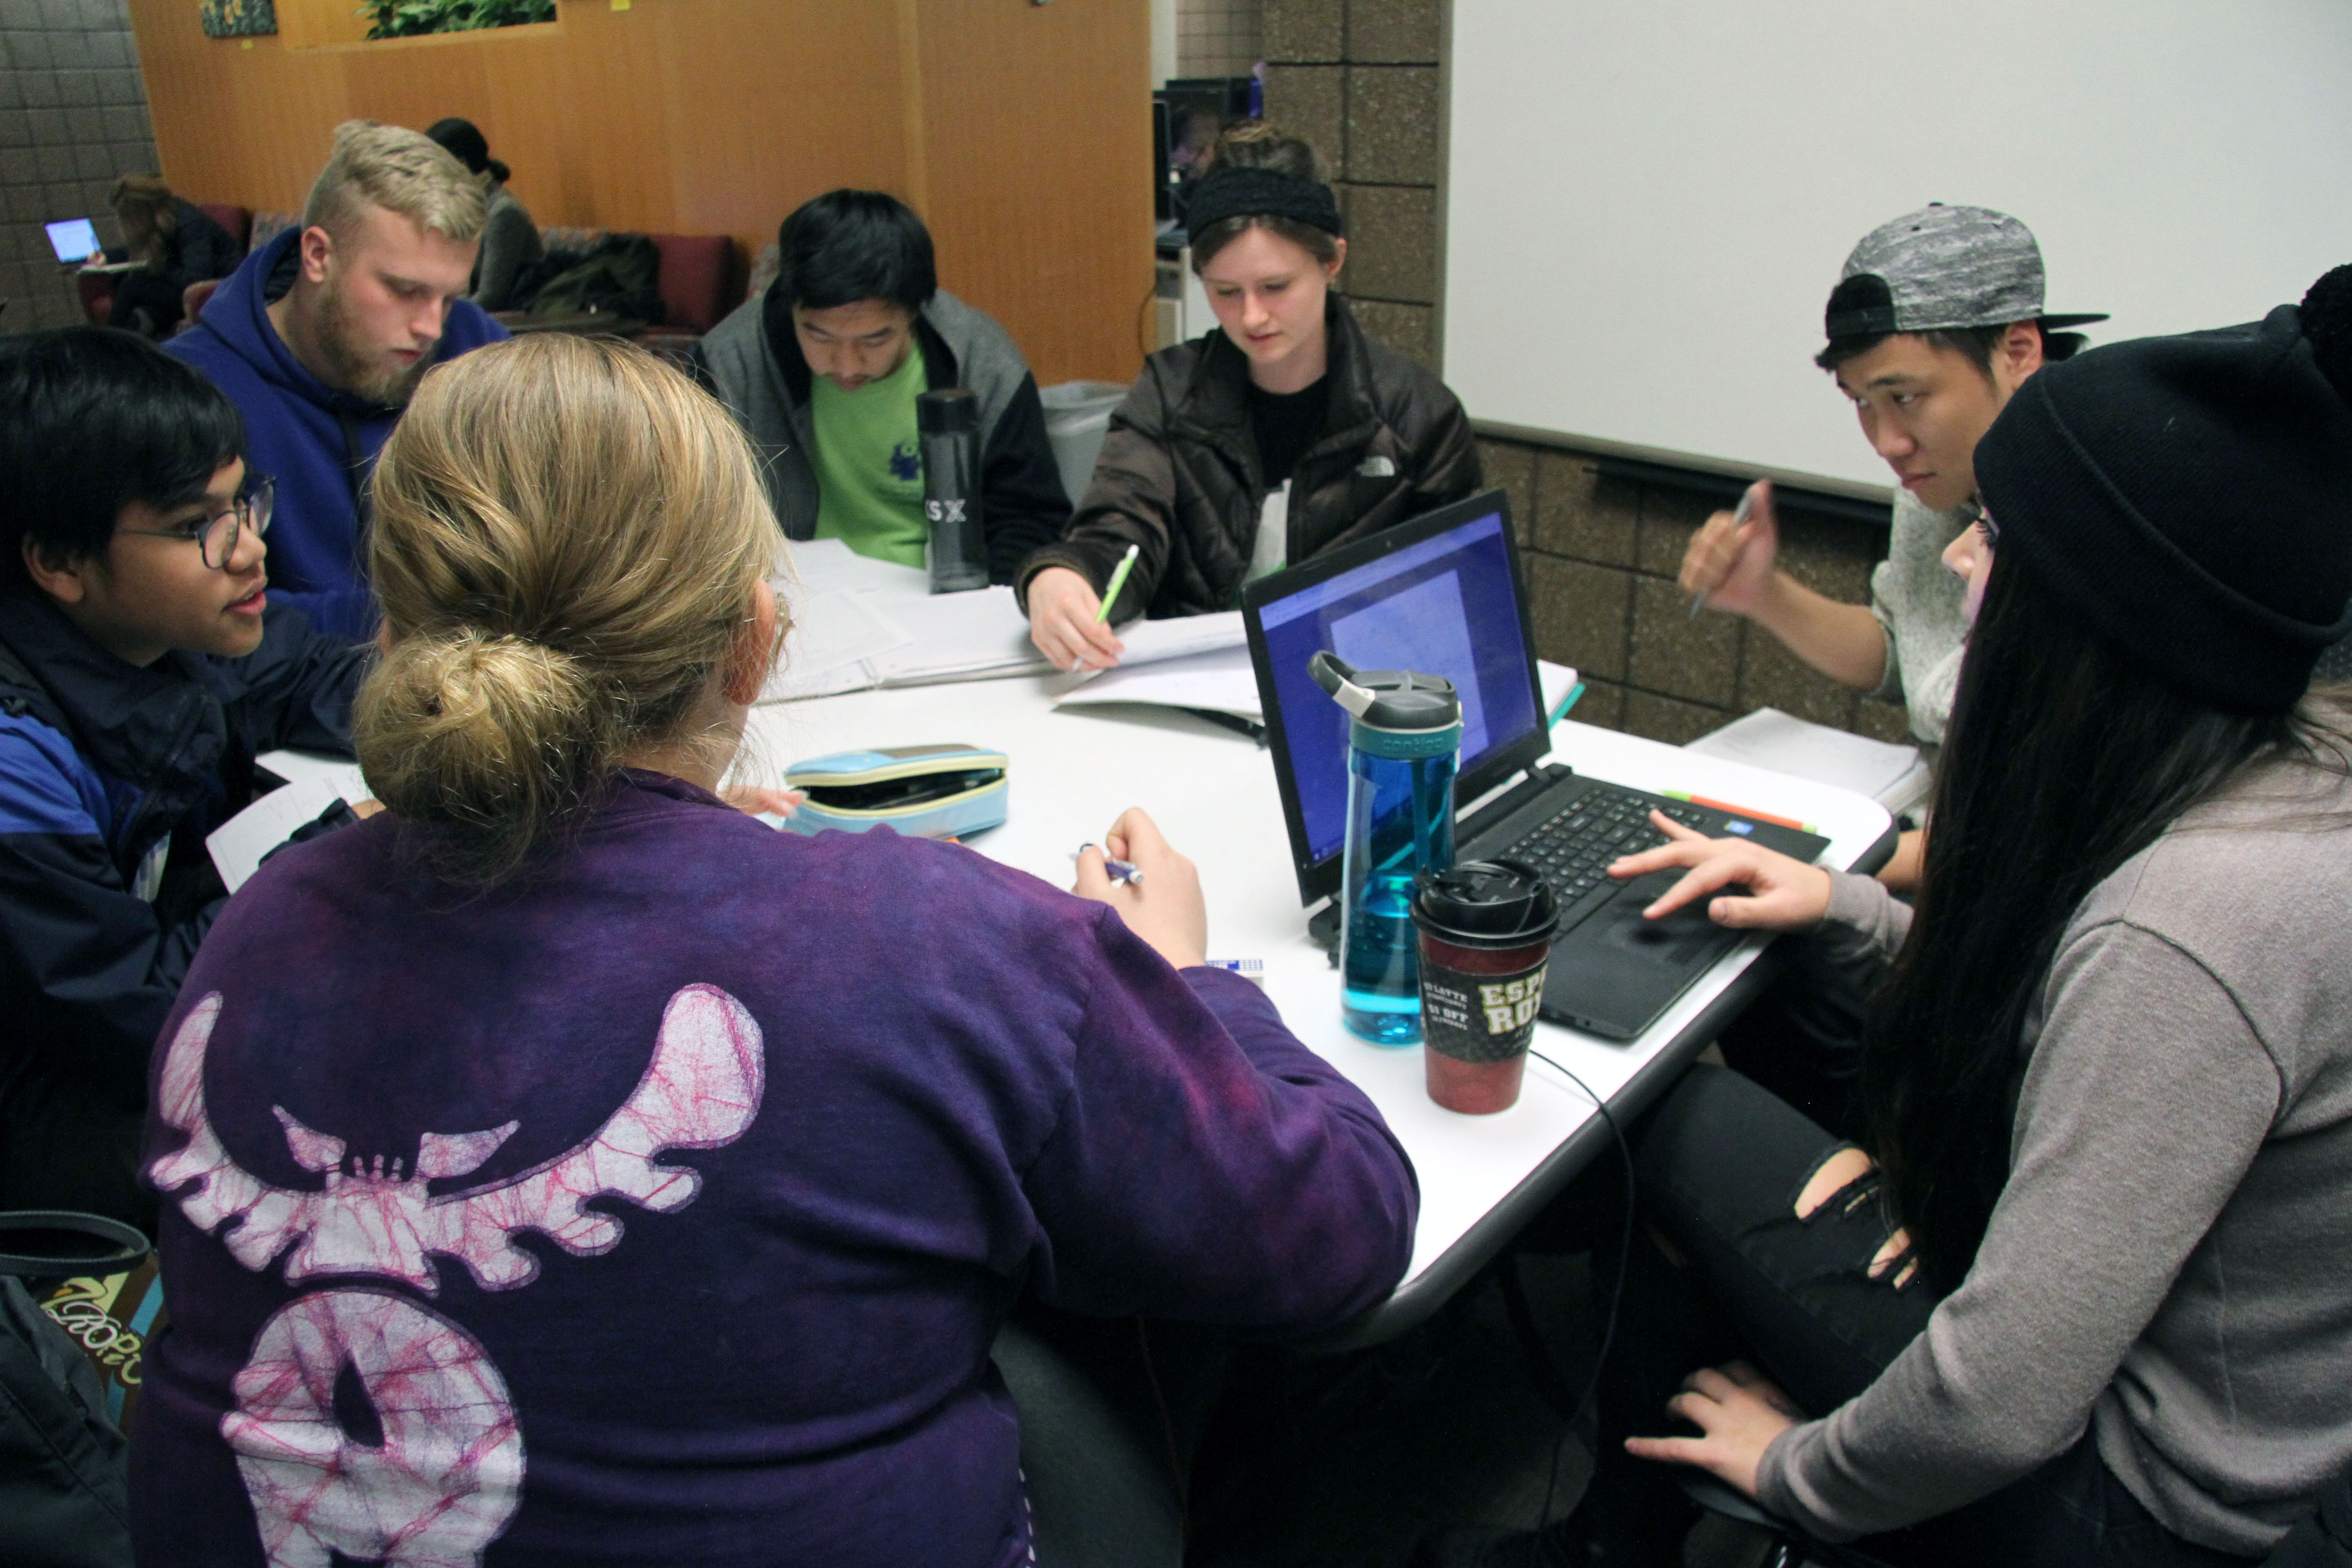 Students working in a group around a table